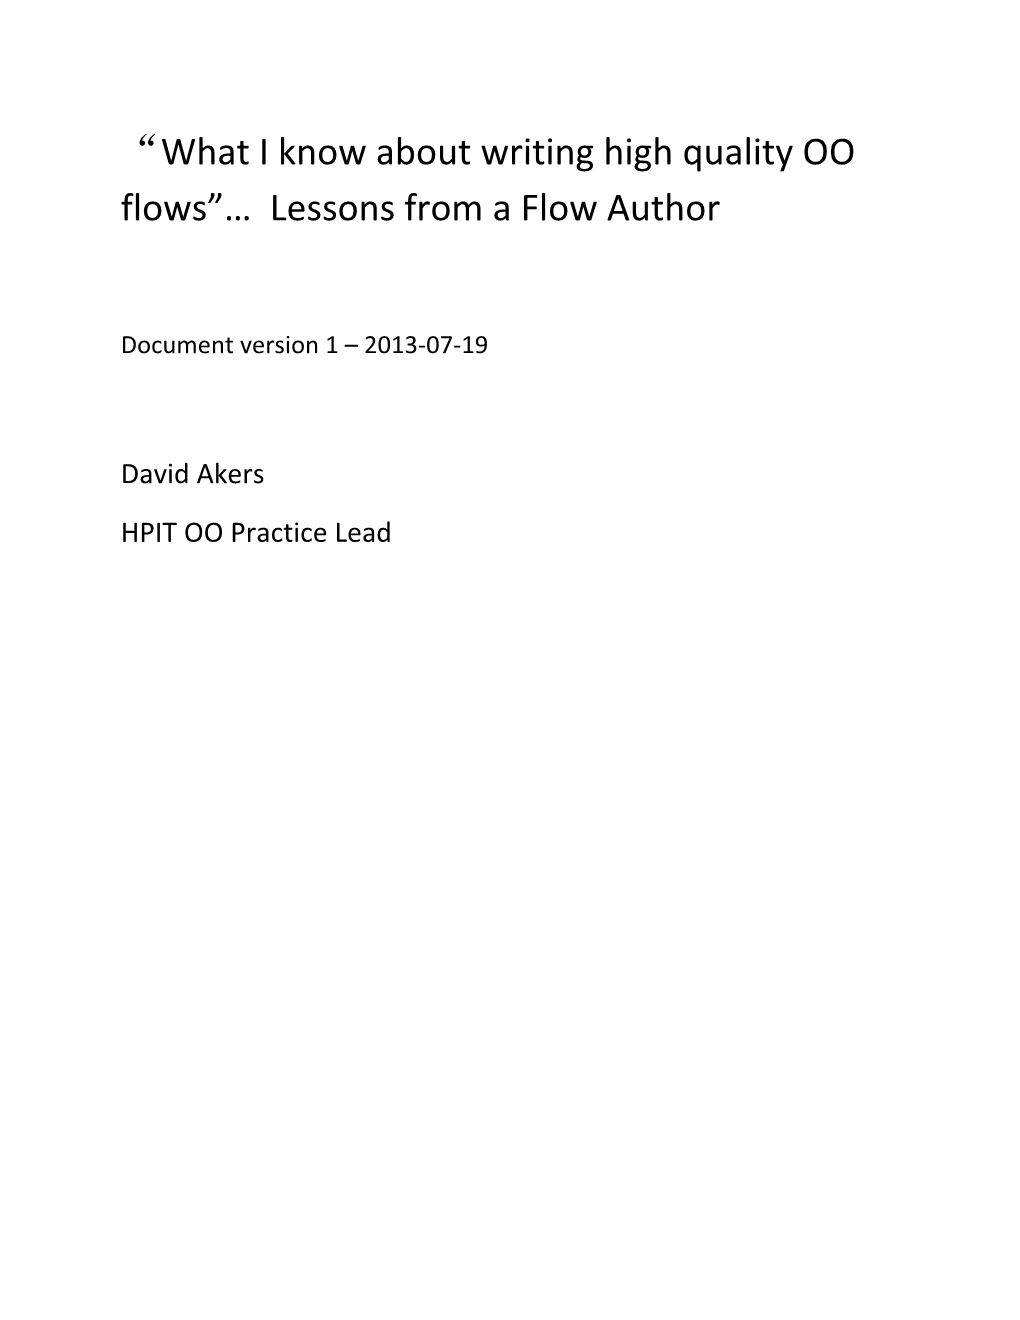 What I Know About Writing High Quality OO Flows Lessons from a Flow Author